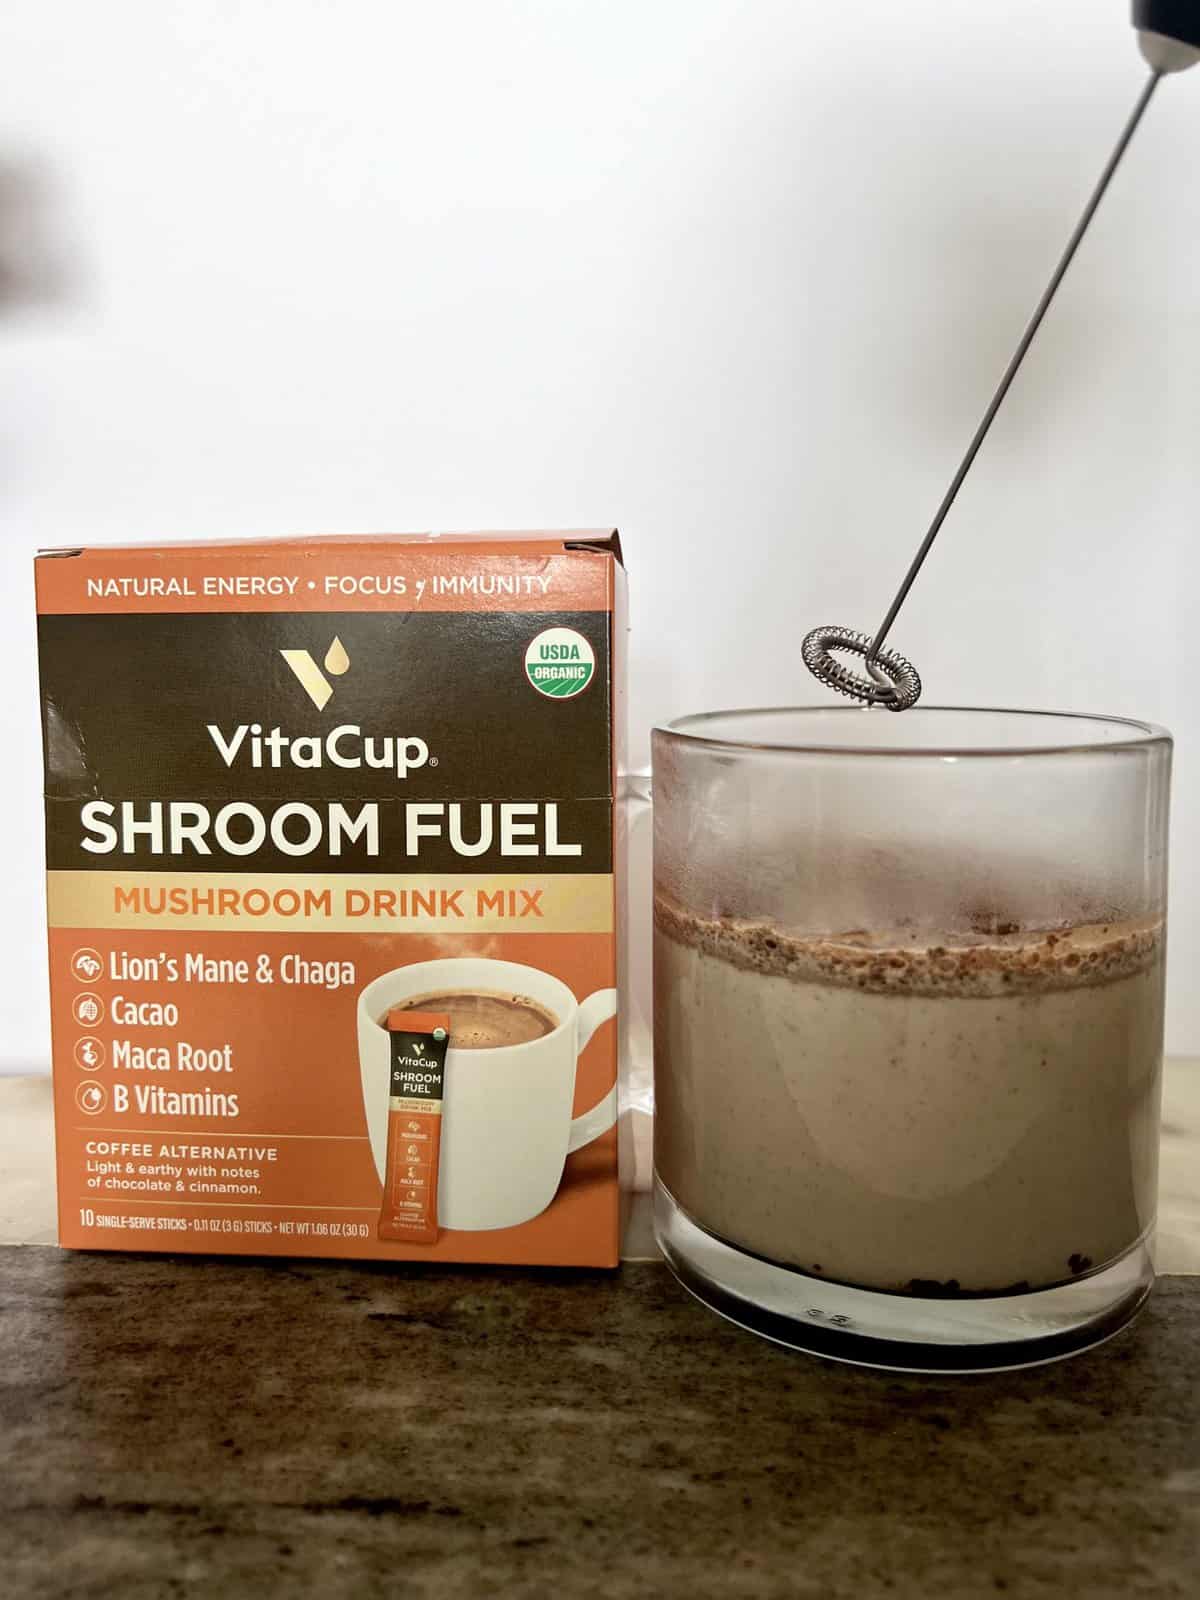 VitaCup-Shroom-Fuel-Mushroom-Based-Coffee-next-to-a-cup-of-brewed-coffee-scaled